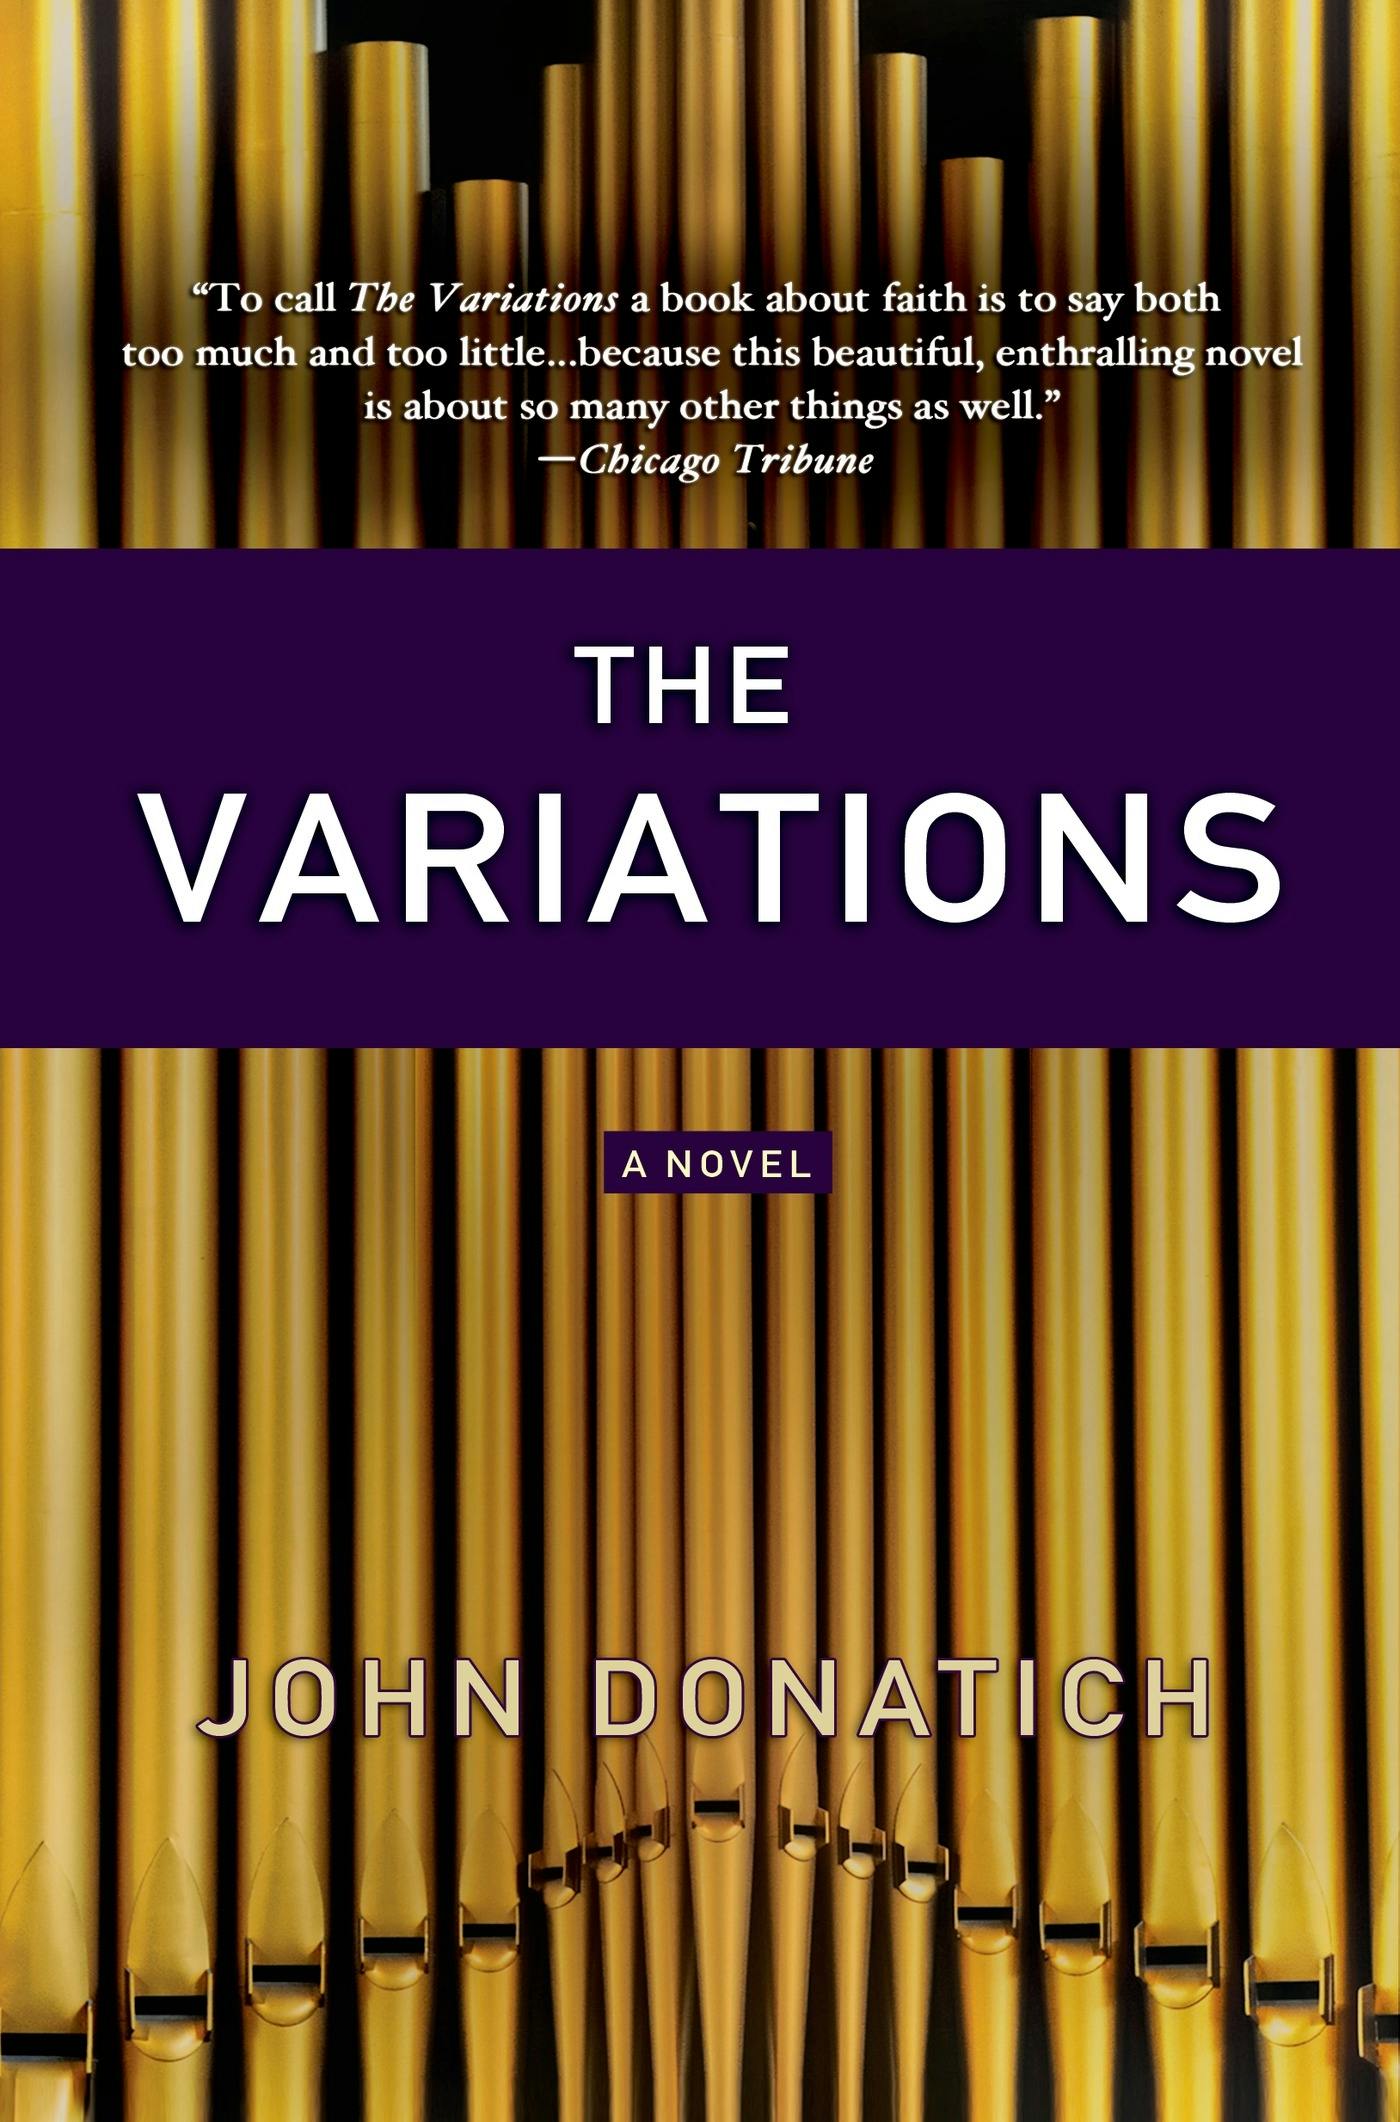 The Variations